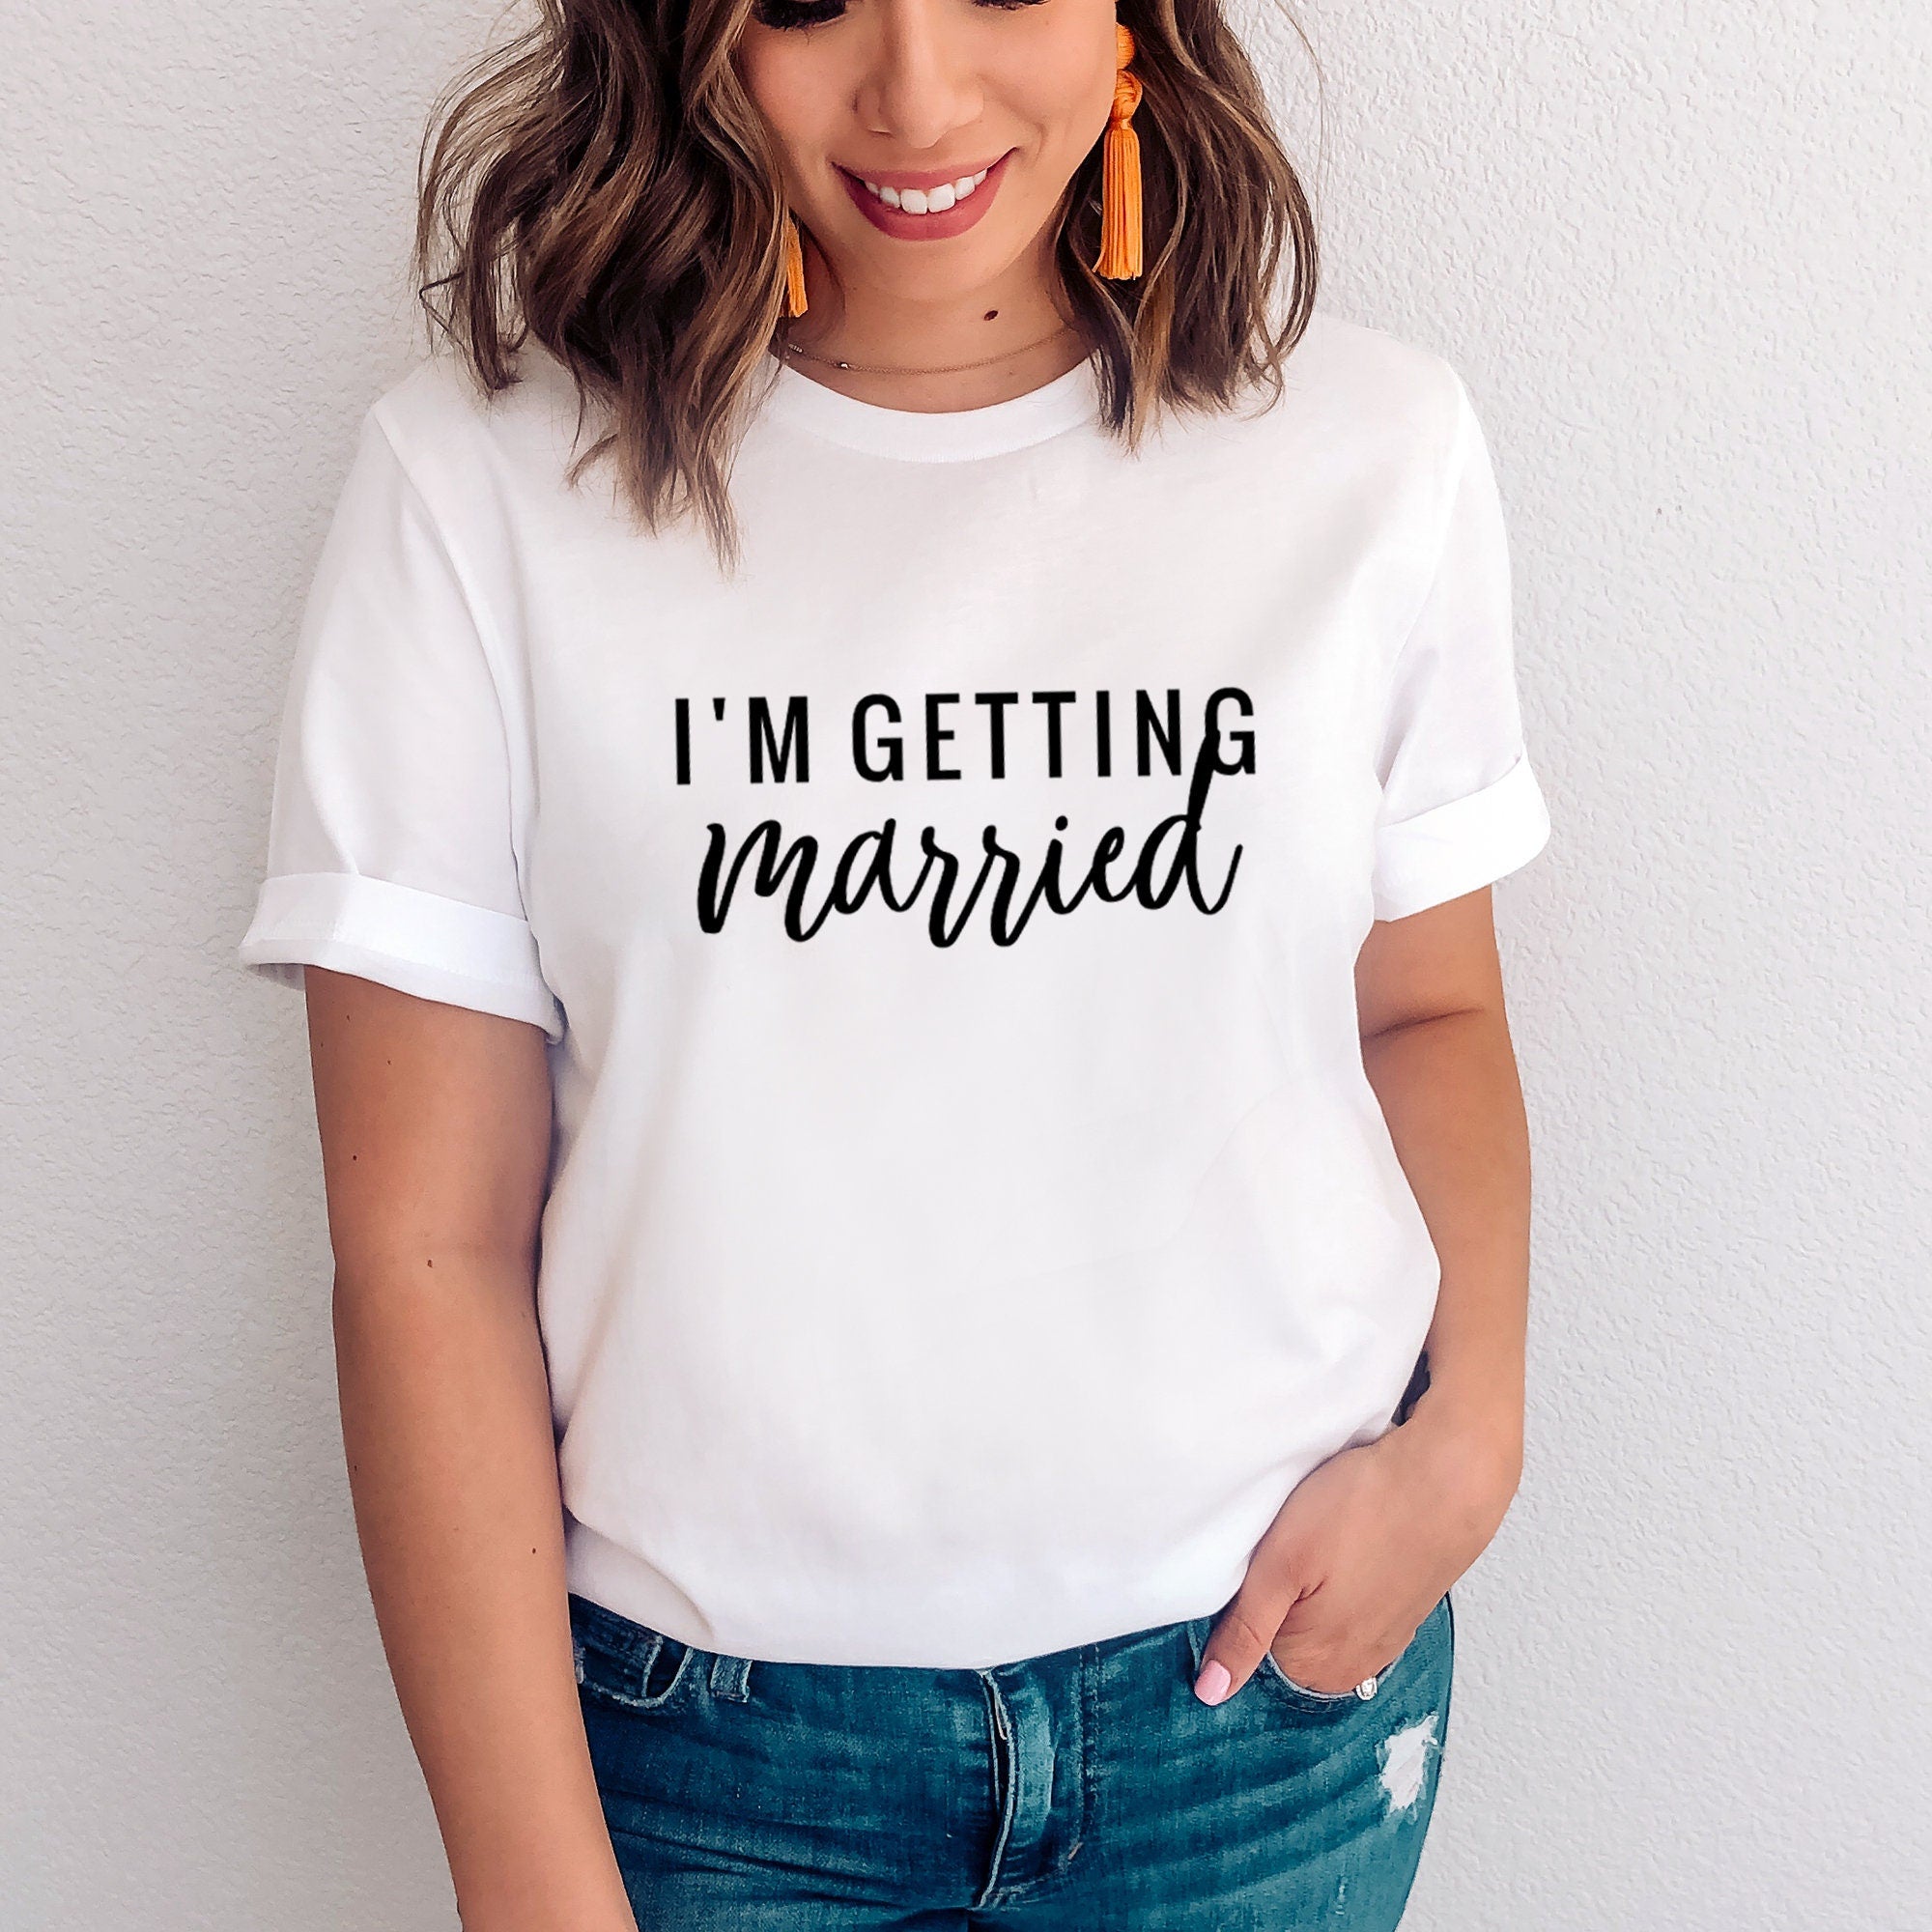 Getting Married Shirt, Wedding Shirts, Bridesmaid Shirt, Bachelorette Shirts, Bridesmaid Gift, Wedding Party Gift